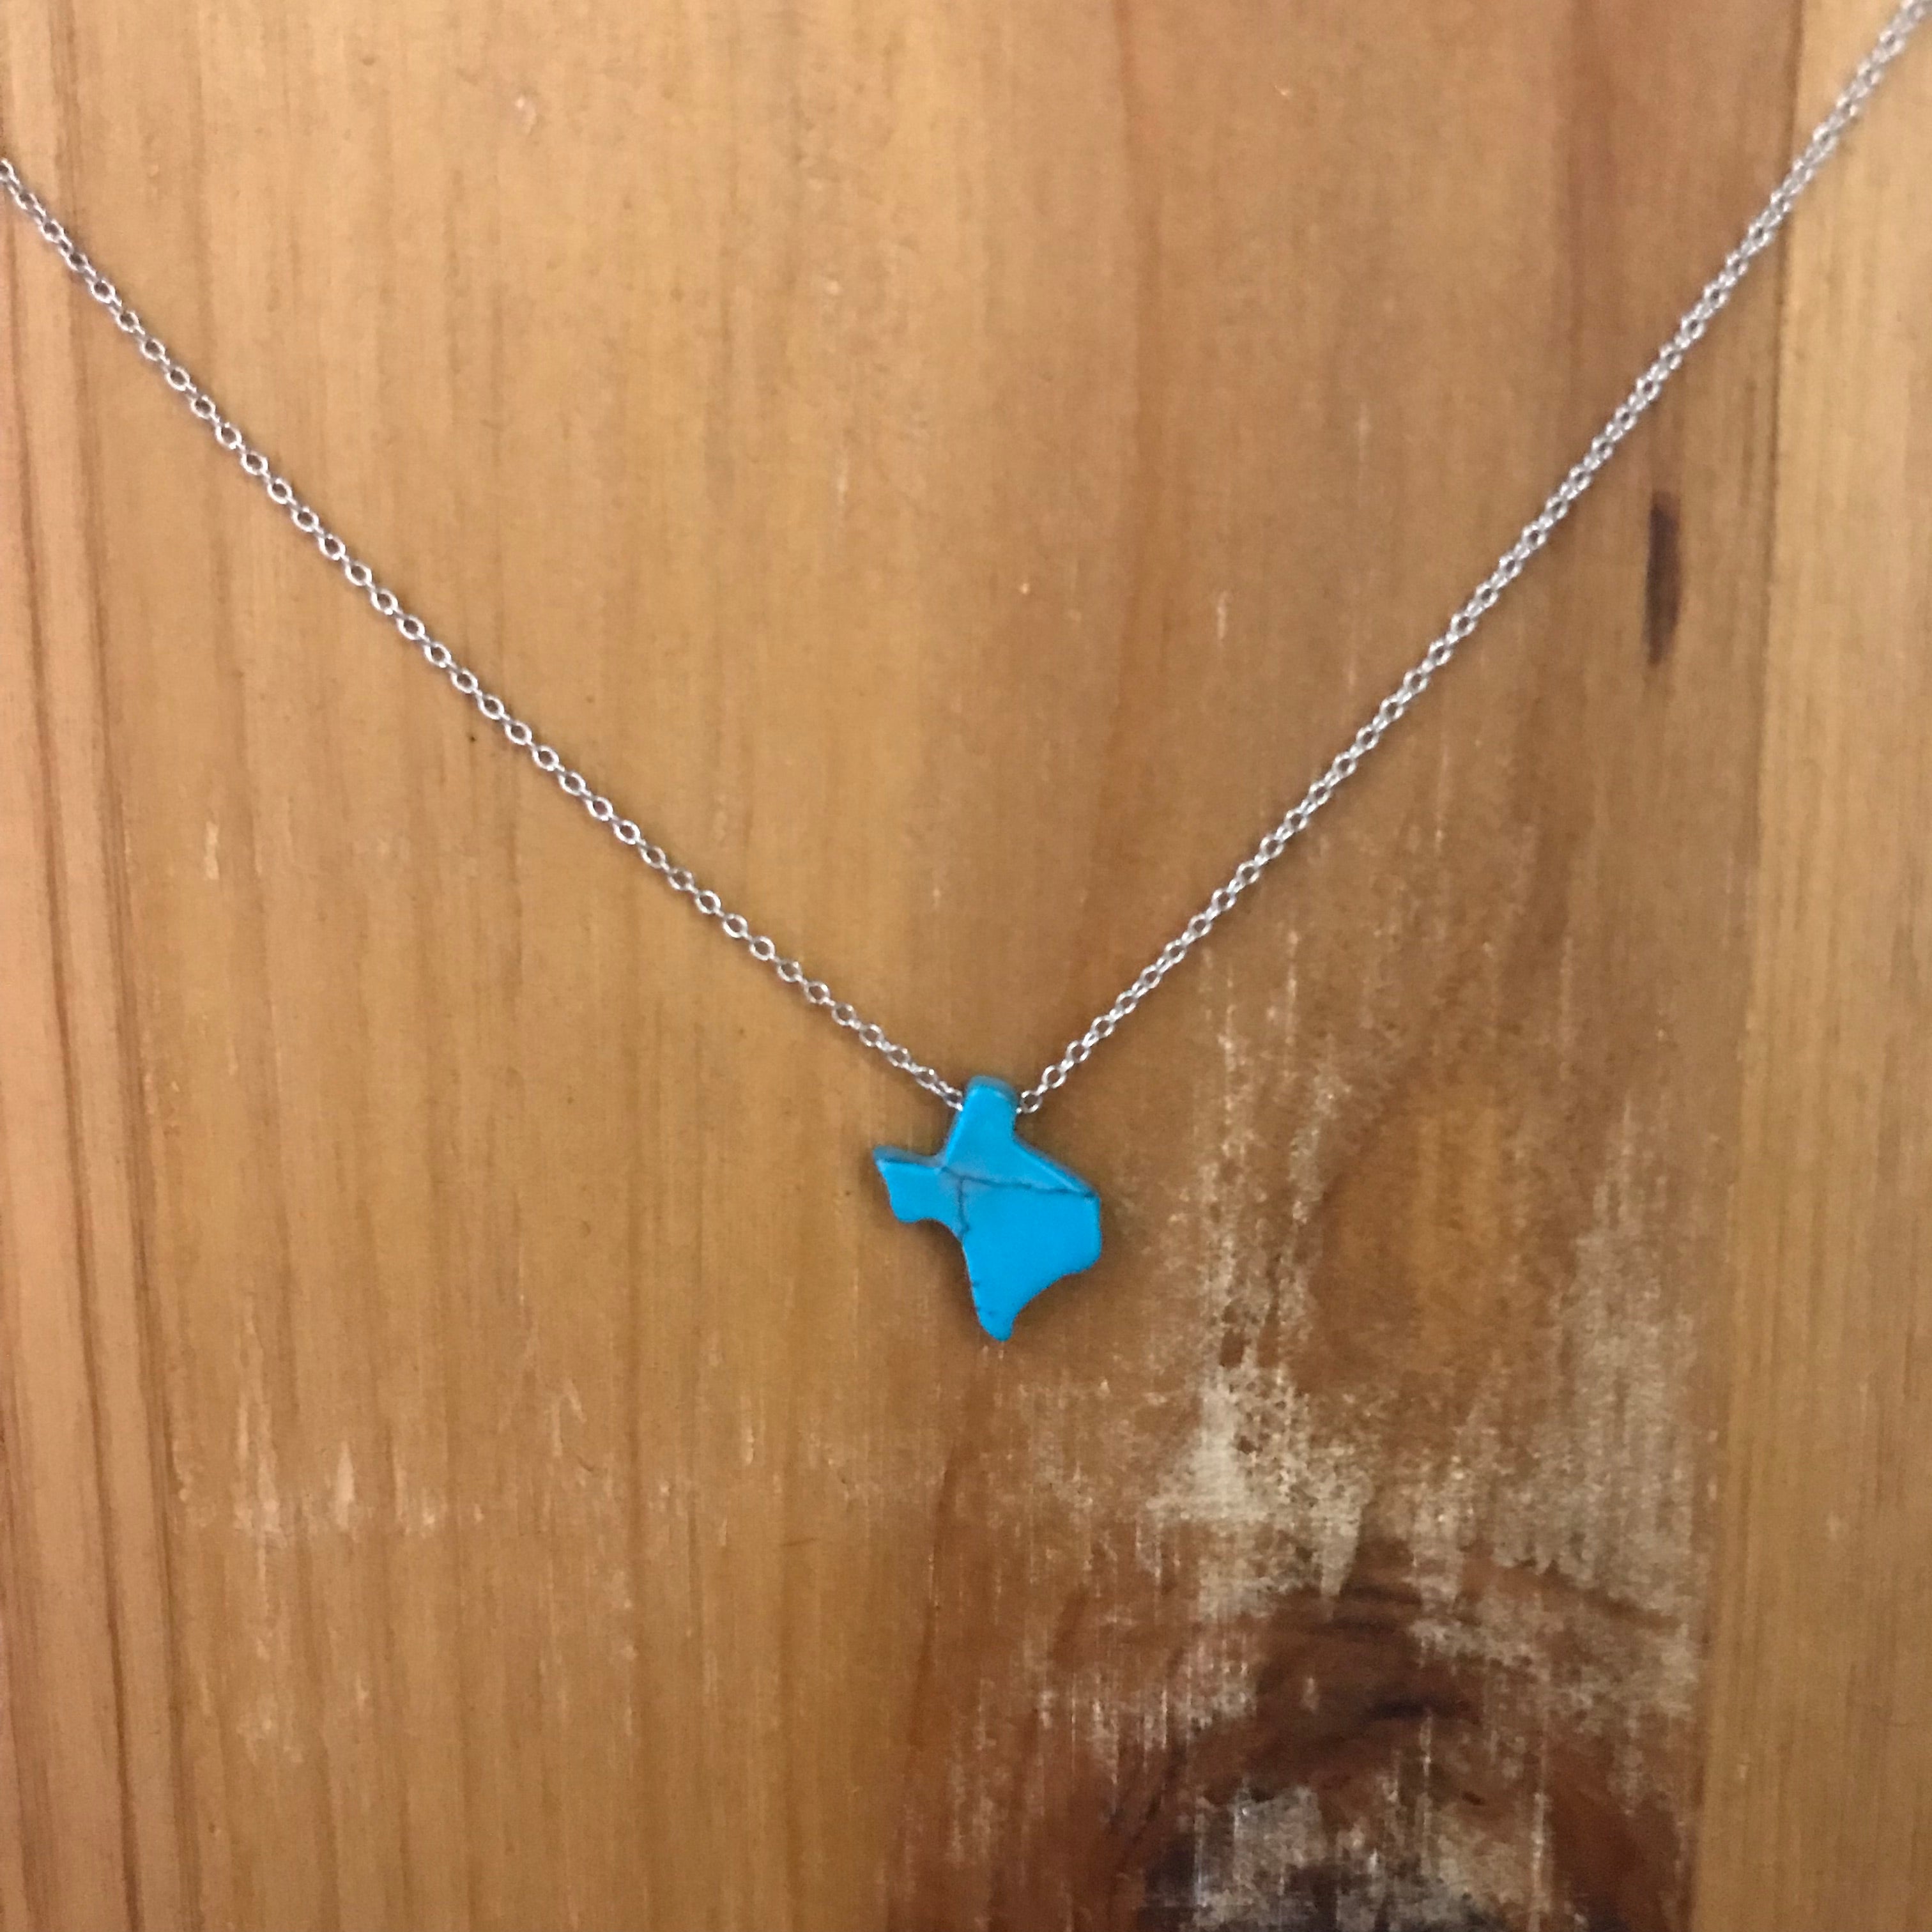 Jewelry, Texas shape turquoise charm on sterling silver chain